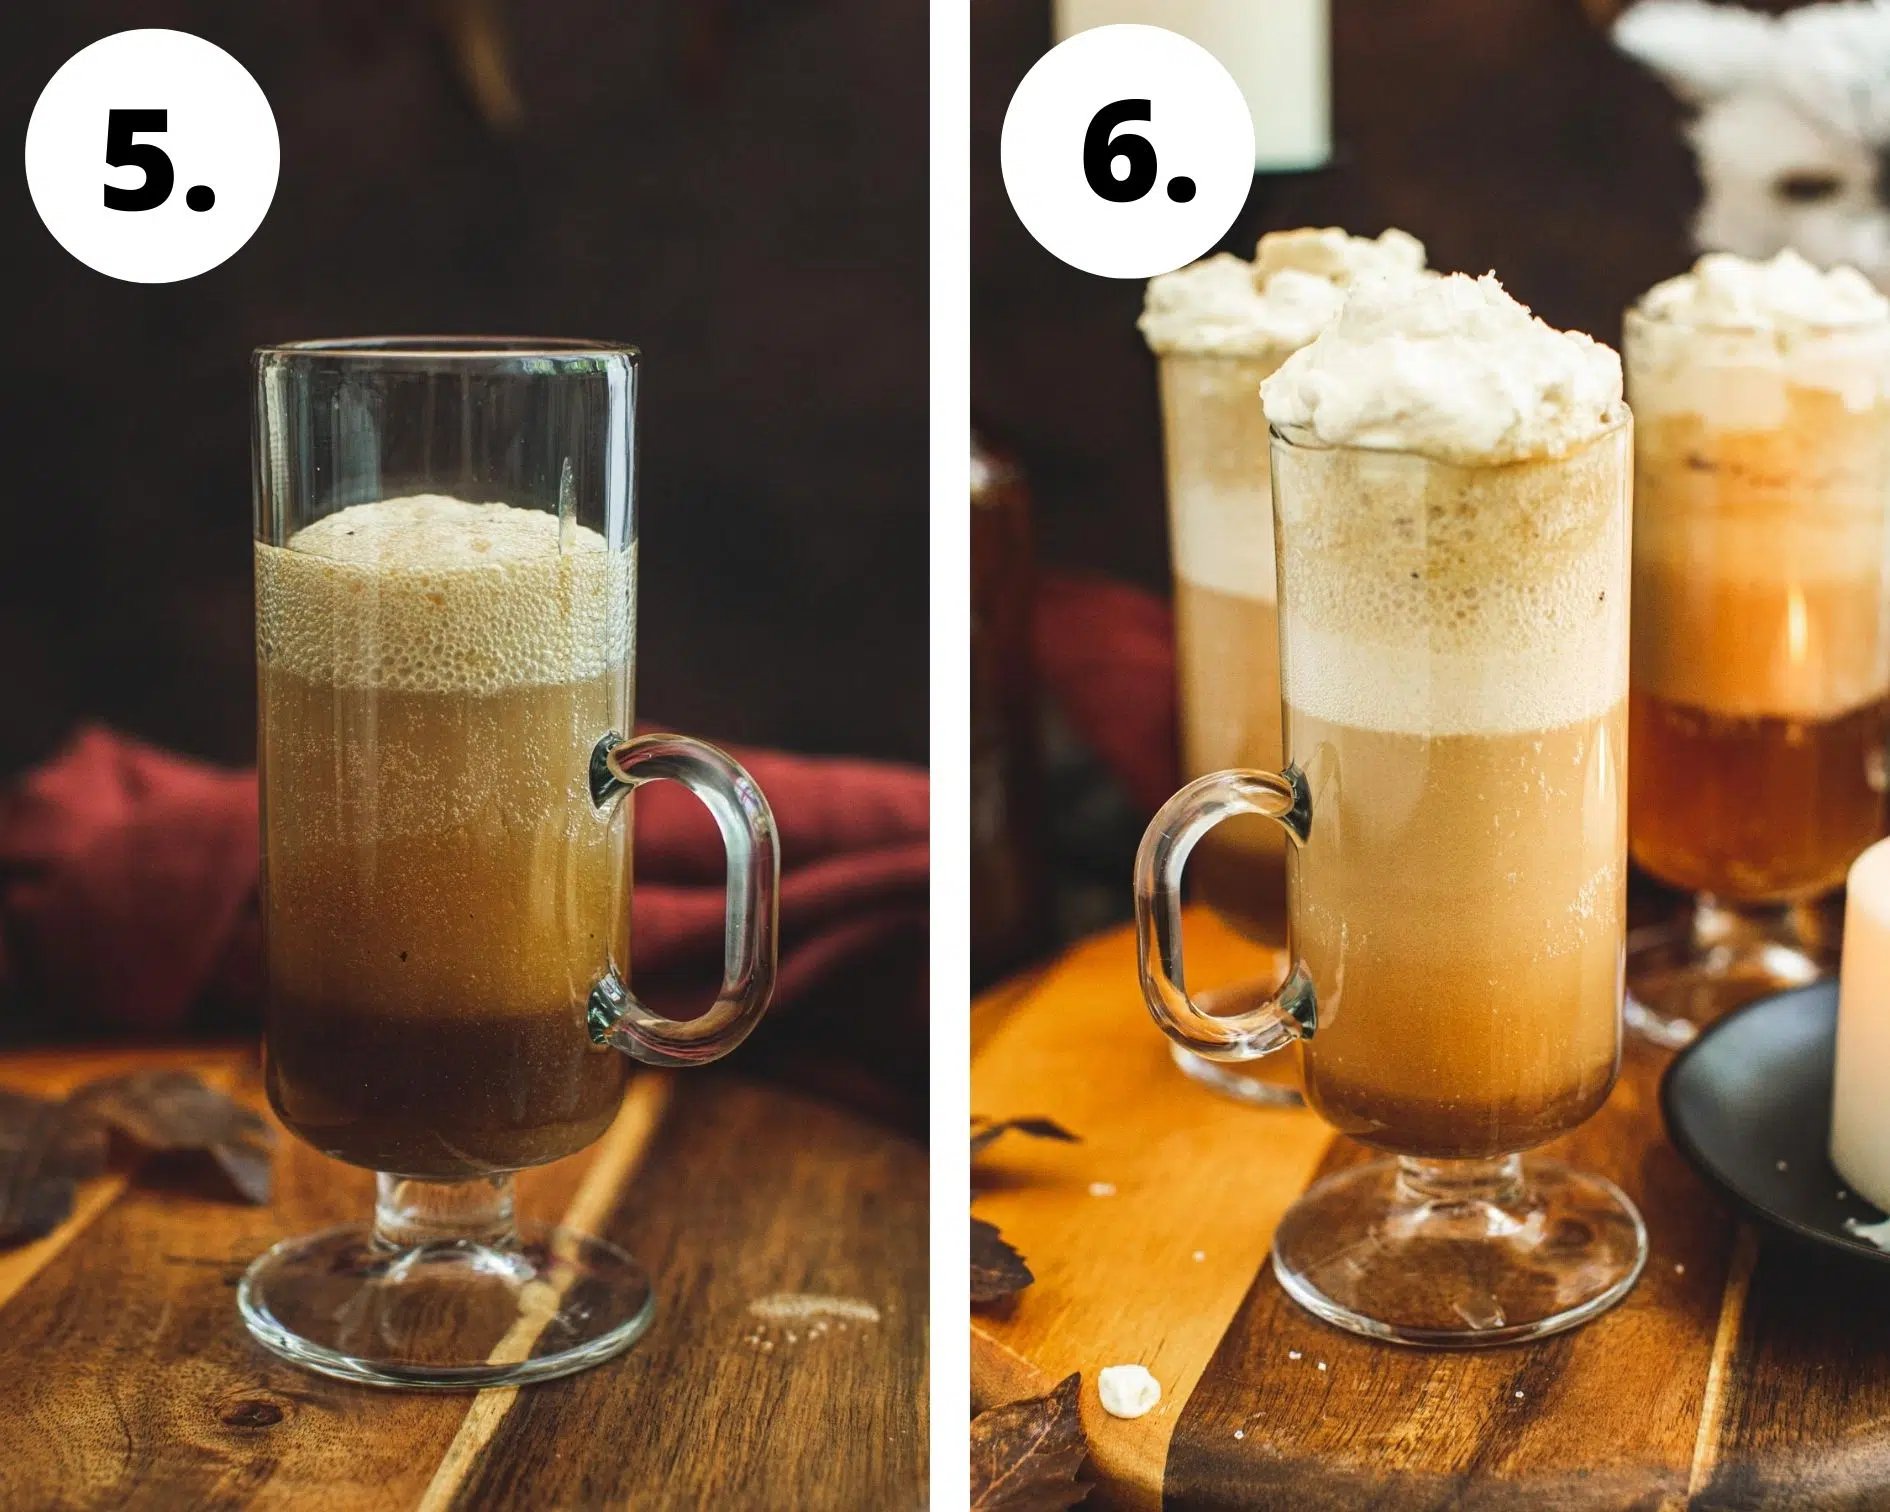 Harry Potter butterbeer process steps 5 and 6.